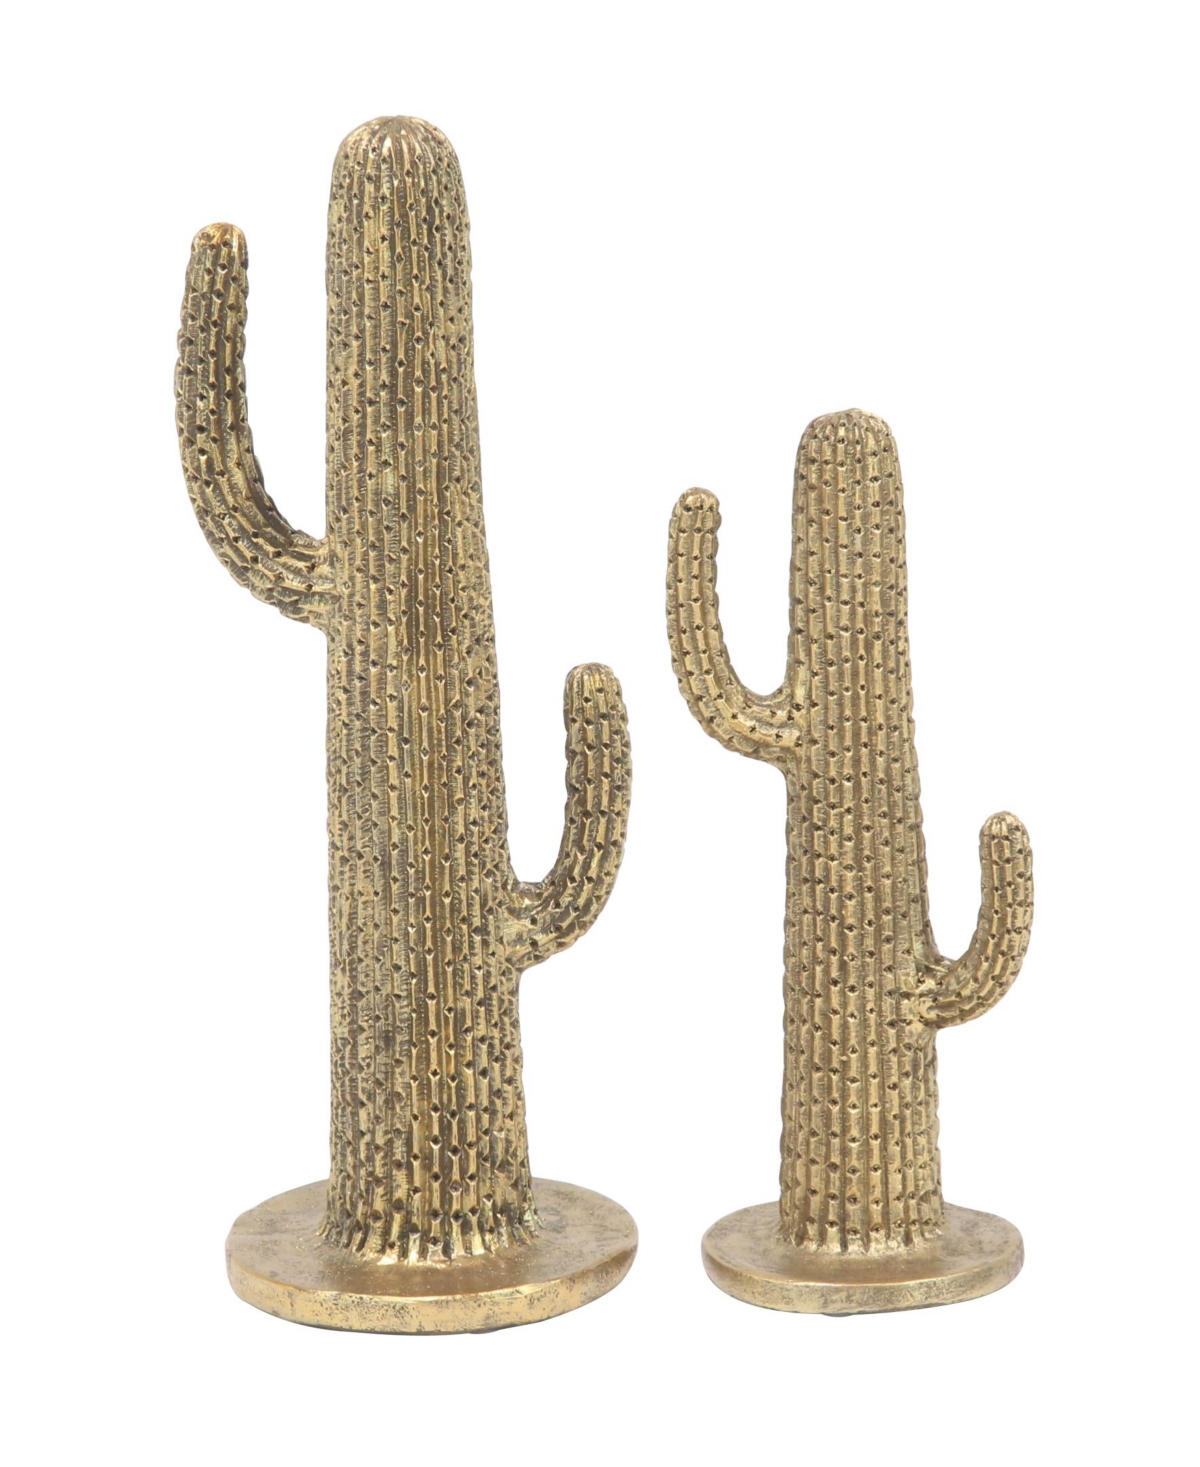 Rosemary Lane Eclectic Cactus Sculpture, Set Of 2 In Gold-tone